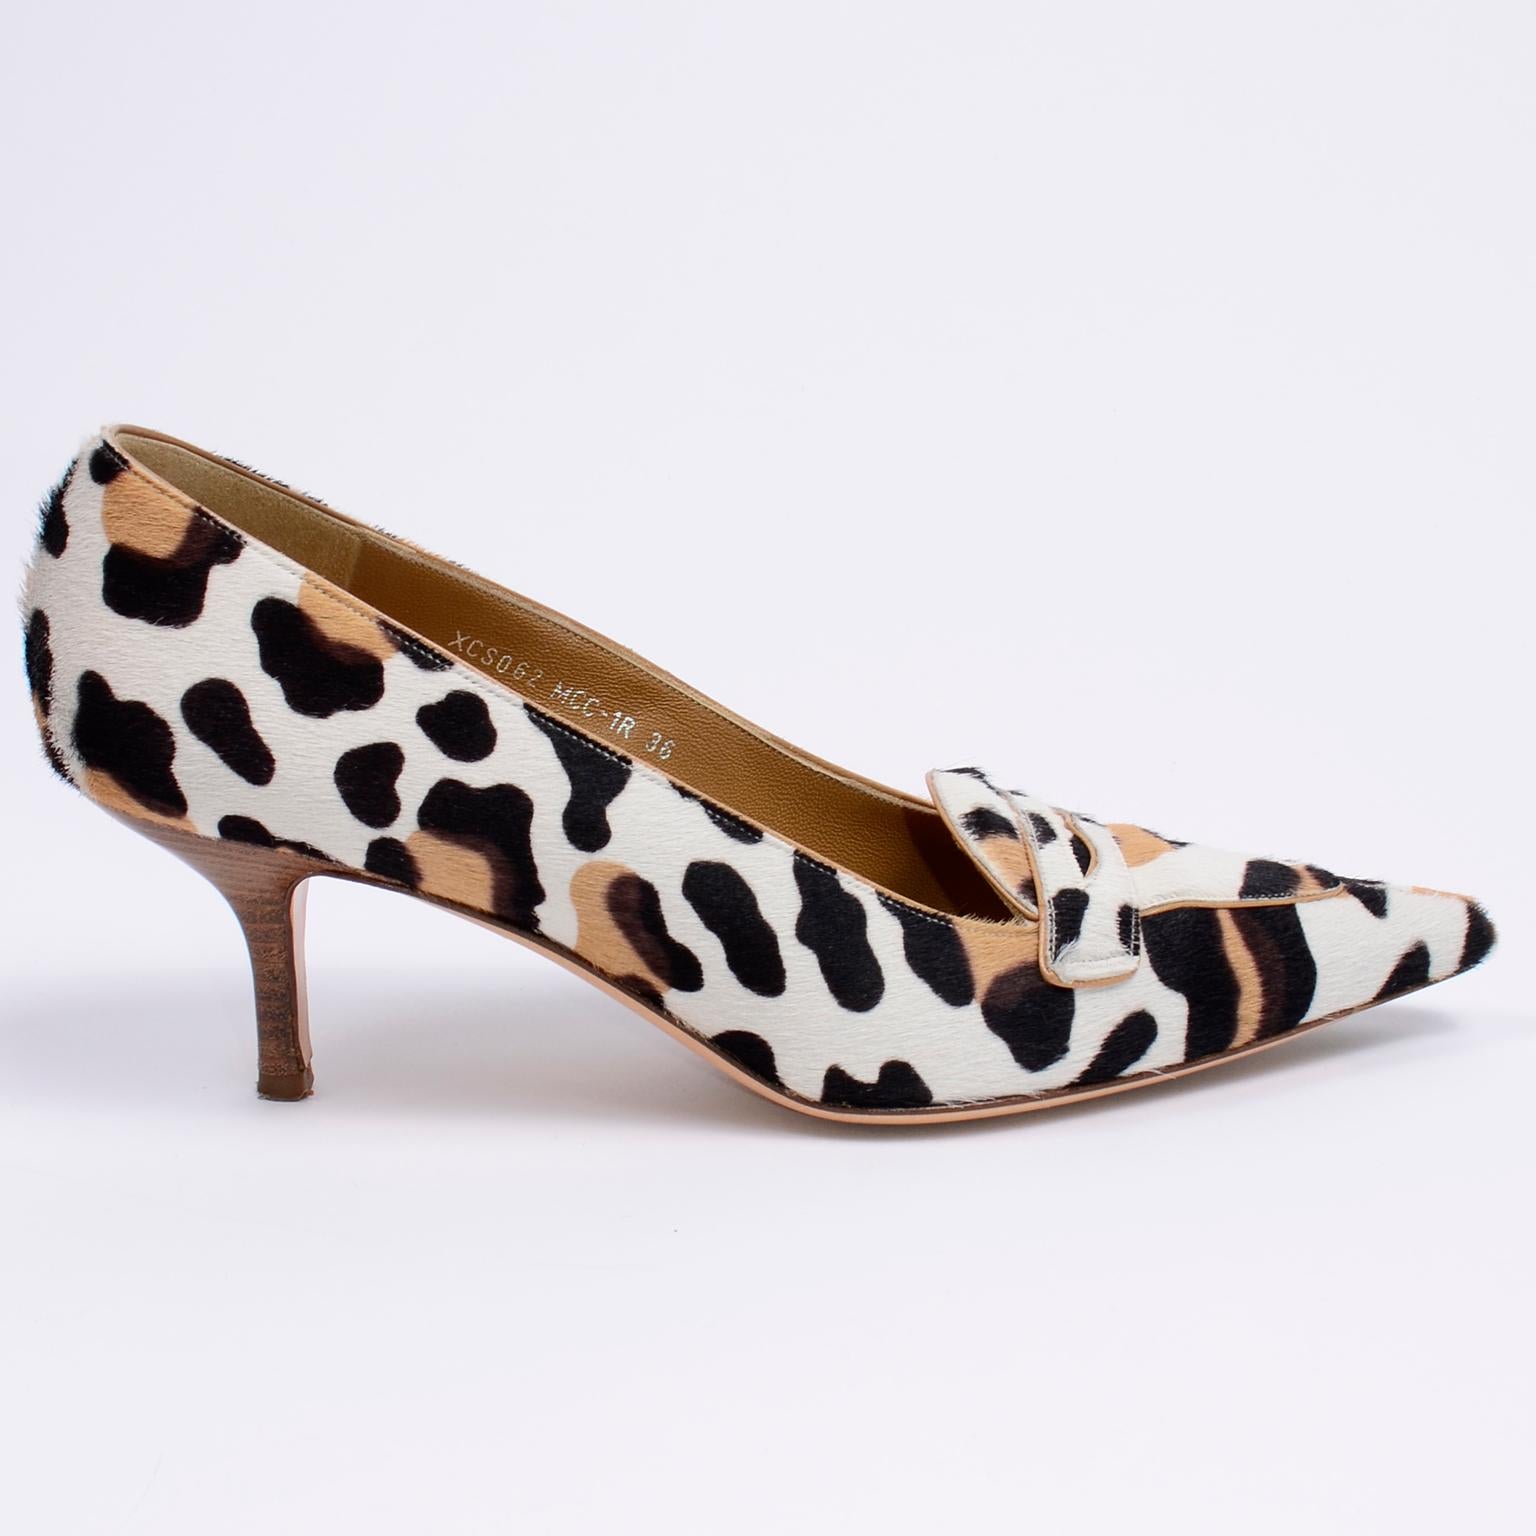 Valentino Garavani Pony Fur Leopard Print Penny Loafer Style Wood Heel Pumps  In Excellent Condition For Sale In Portland, OR